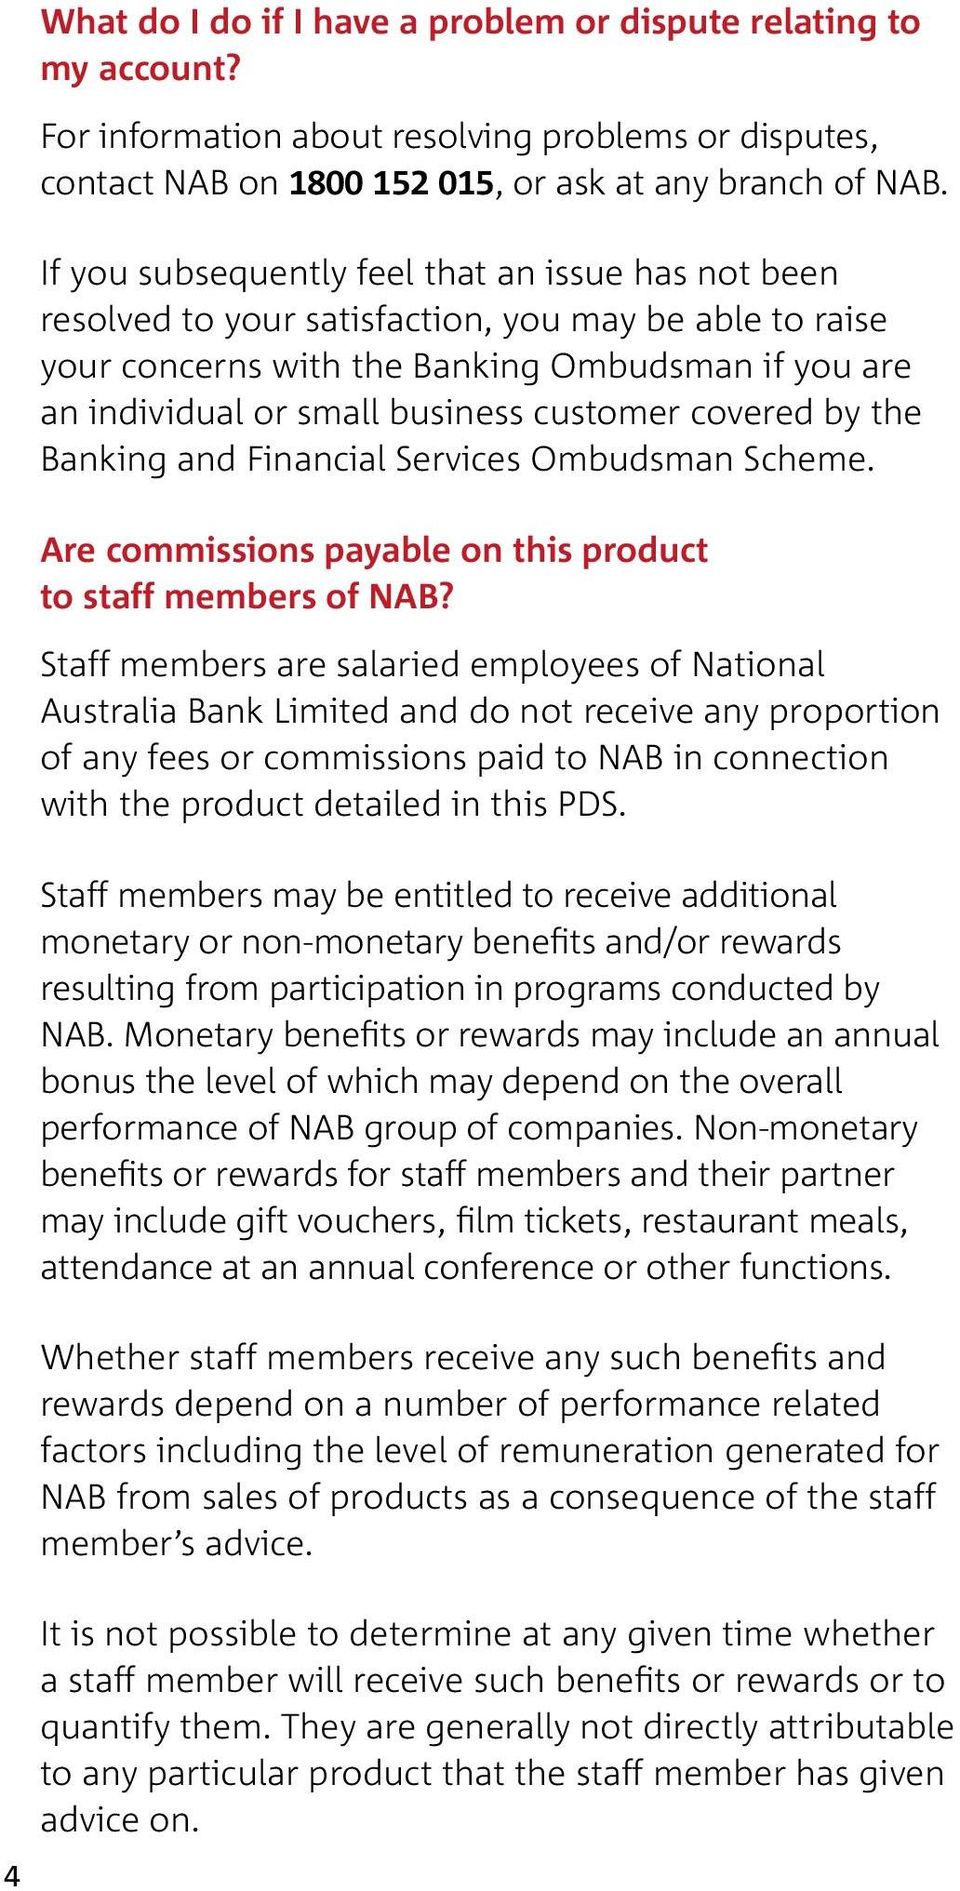 customer covered by the Banking and Financial Services Ombudsman Scheme. Are commissions payable on this product to staff members of NAB?